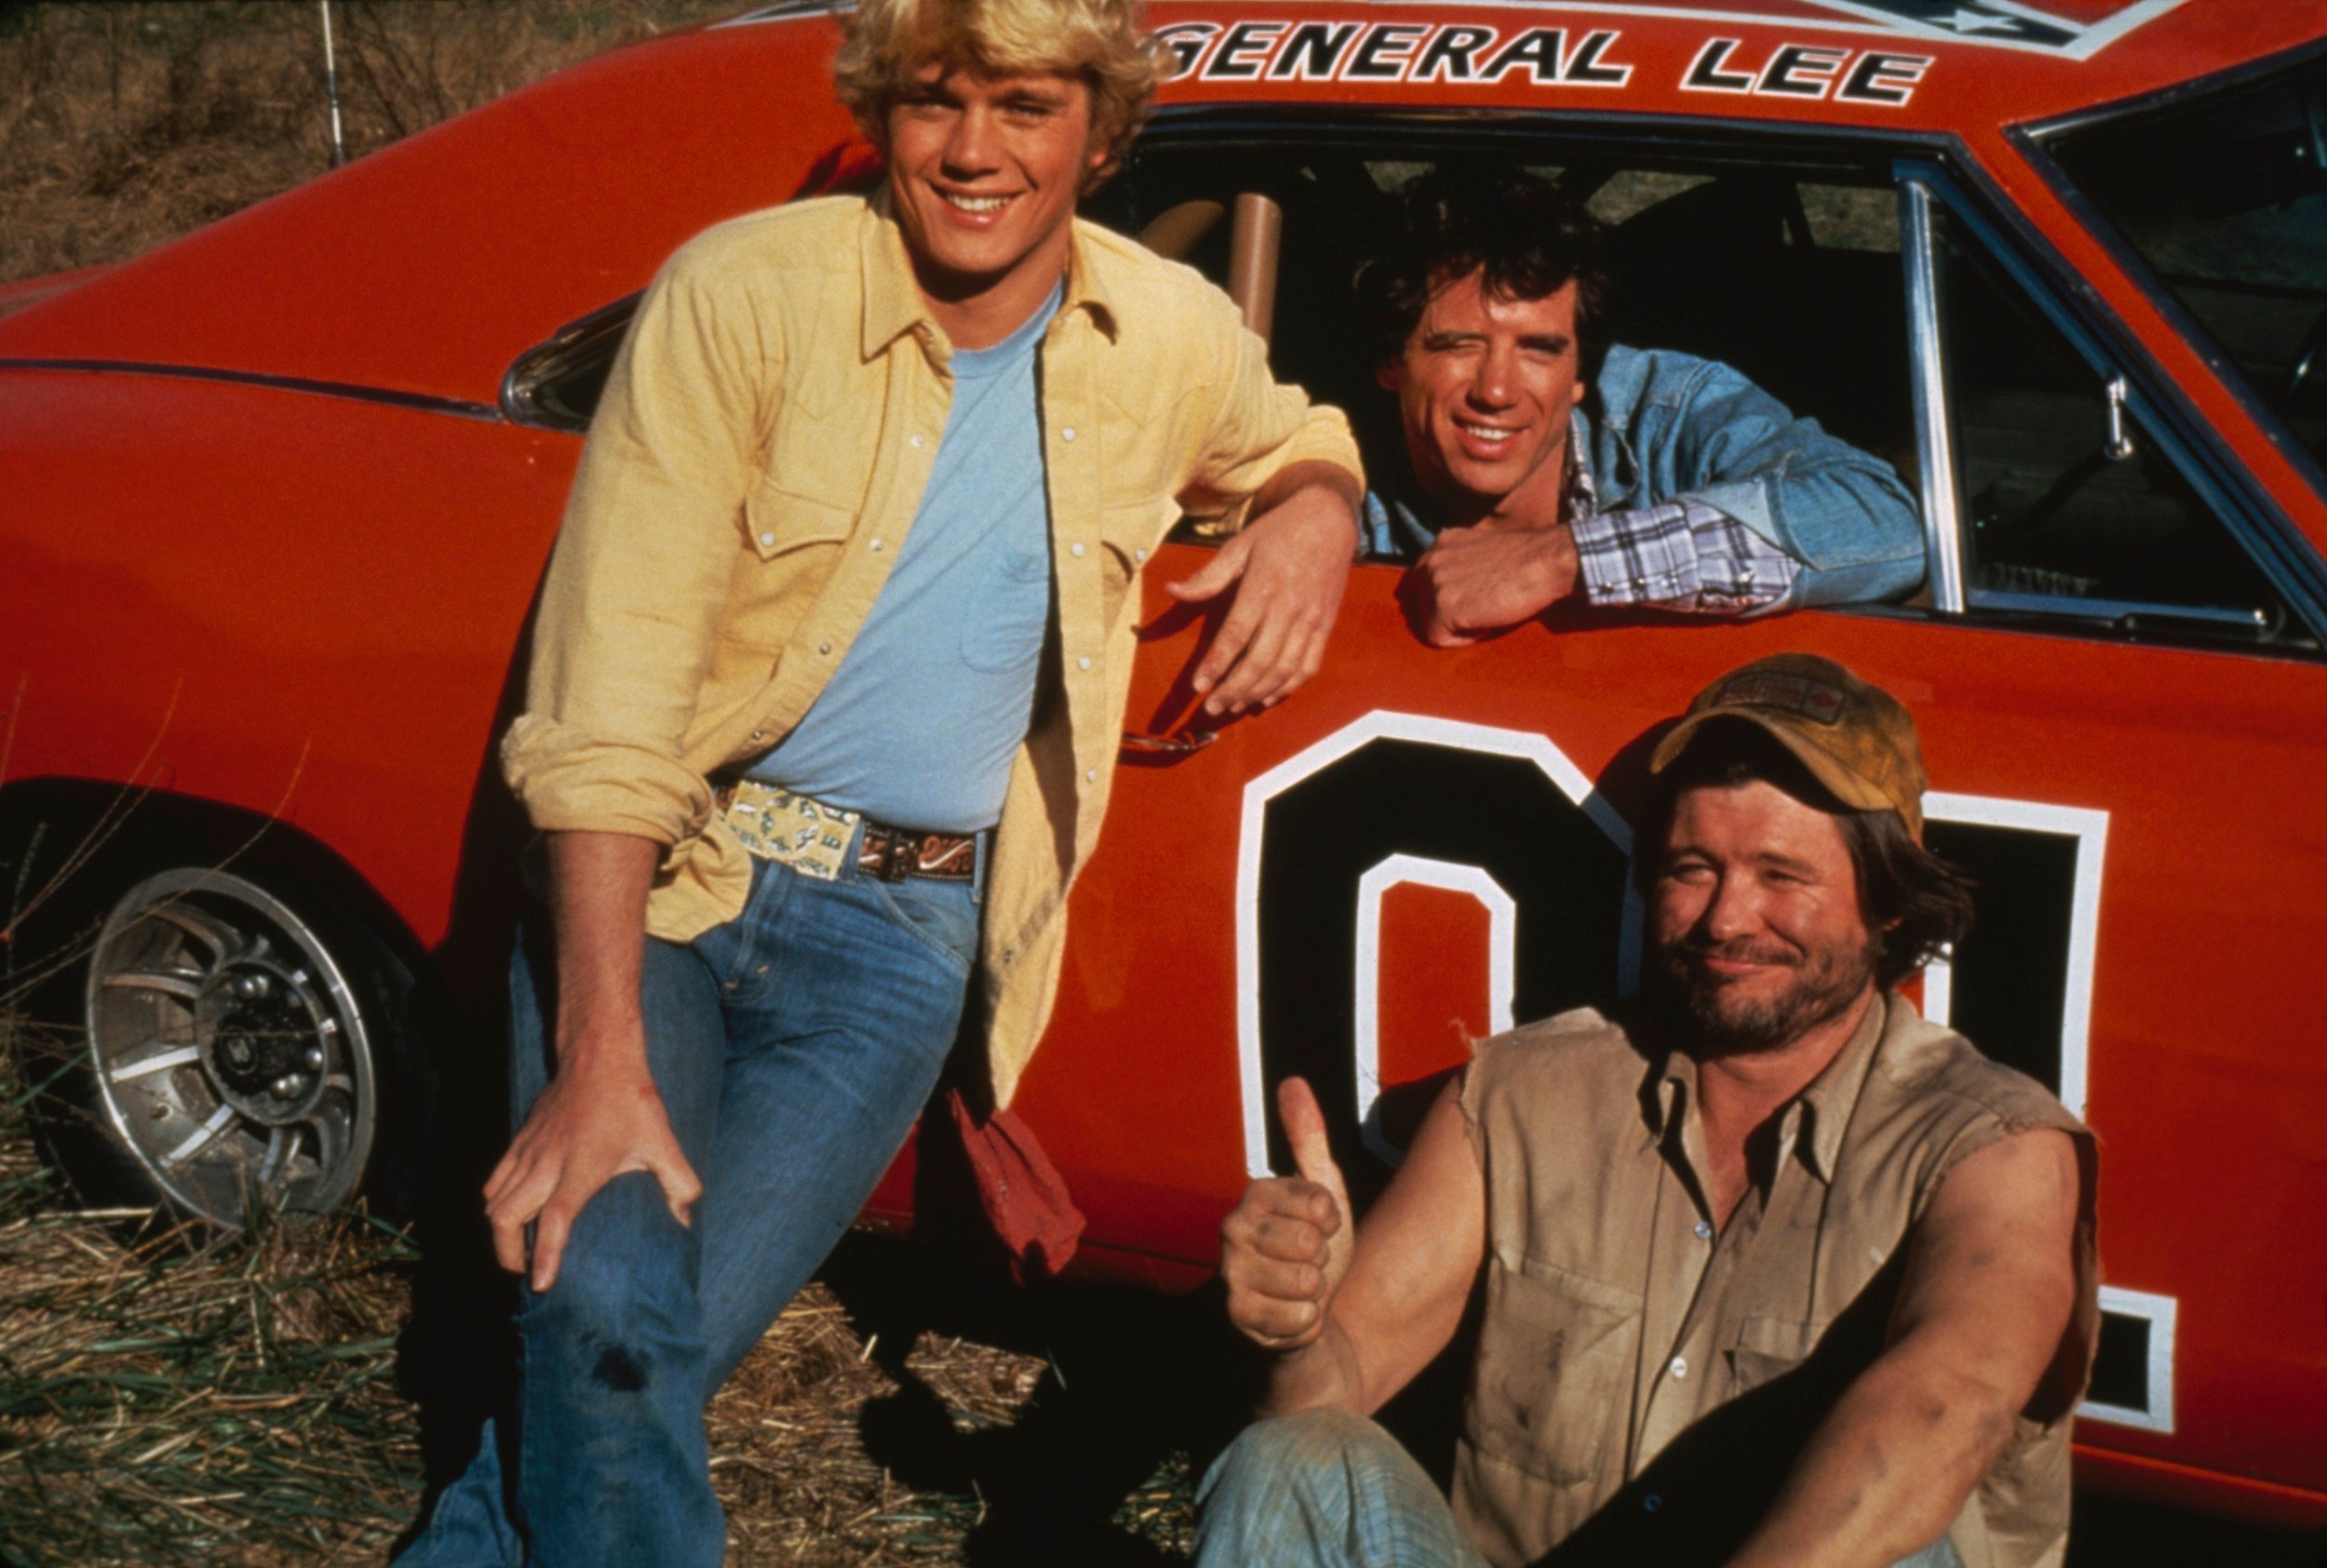 John Schneider, Tom Wopat, and Ben Jones as Bo Duke, Luke Duke, and Cooter. They are posing with the General Lee in The Dukes of Hazzard